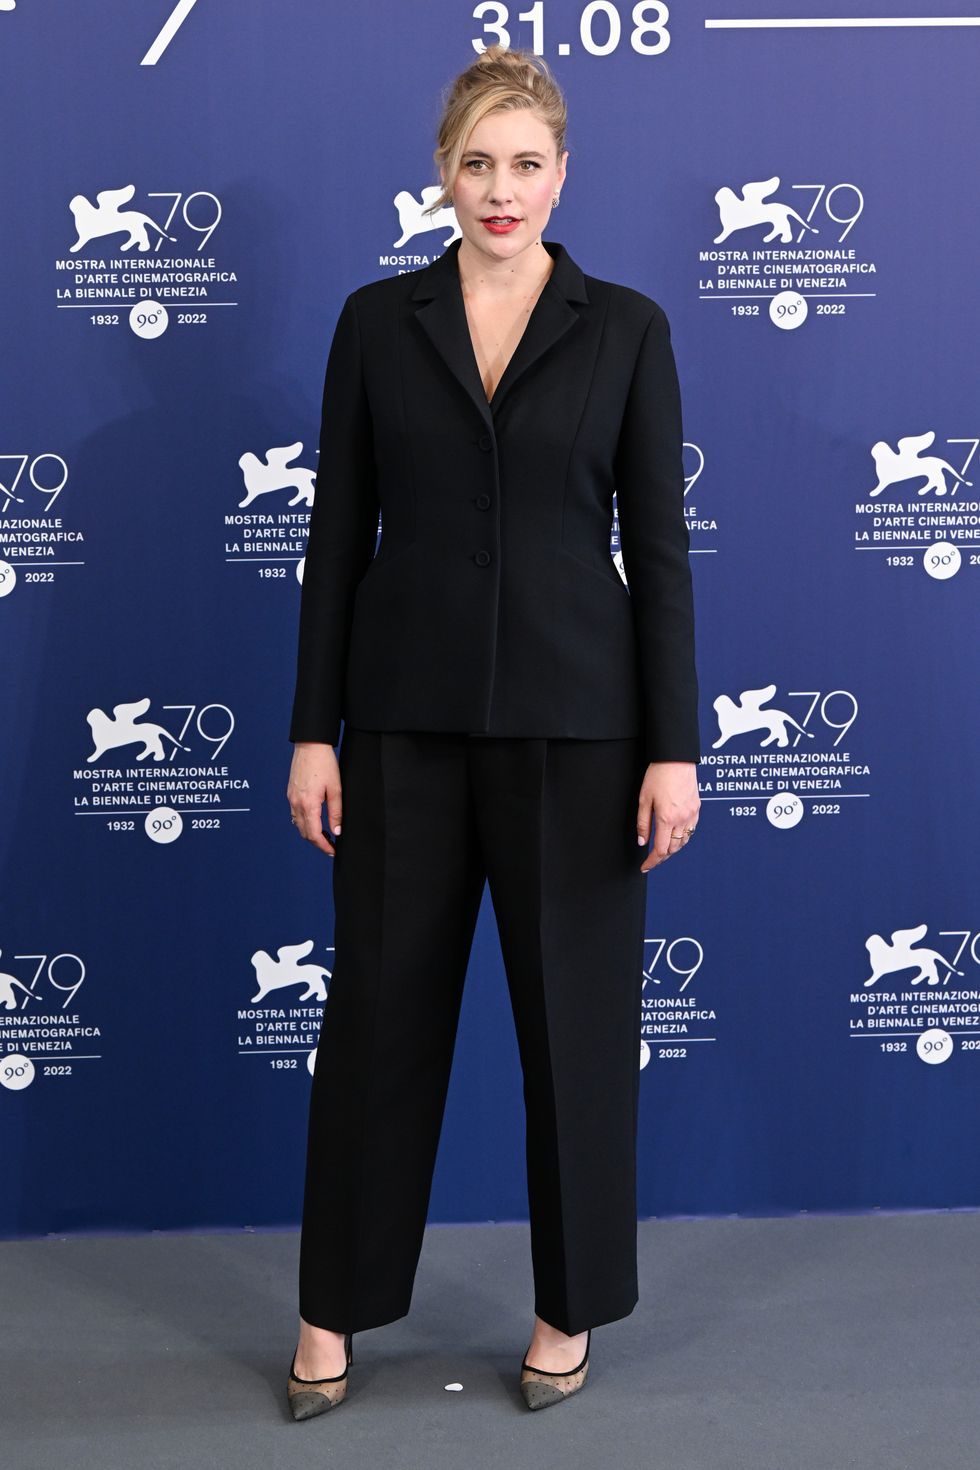 The Best Artists Style at the 2022 Venice Film Festival